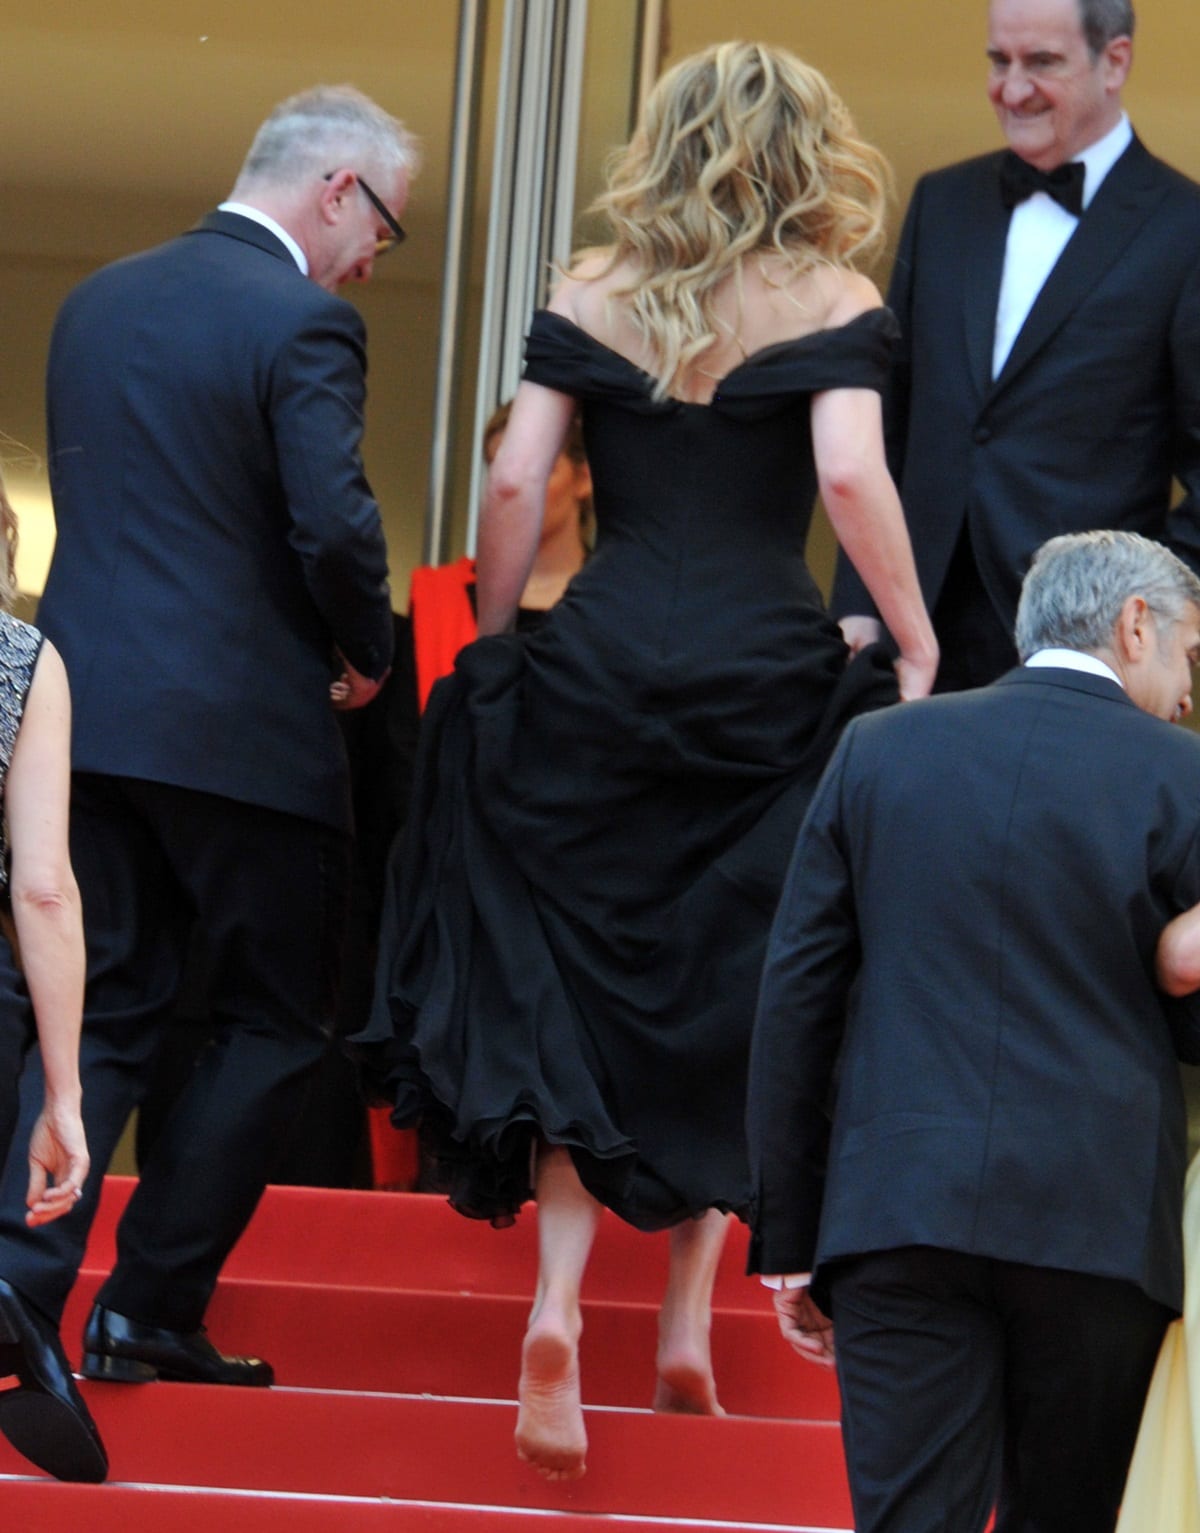 Stepping onto the Money Monster red carpet, Julia Roberts defied convention by going barefoot